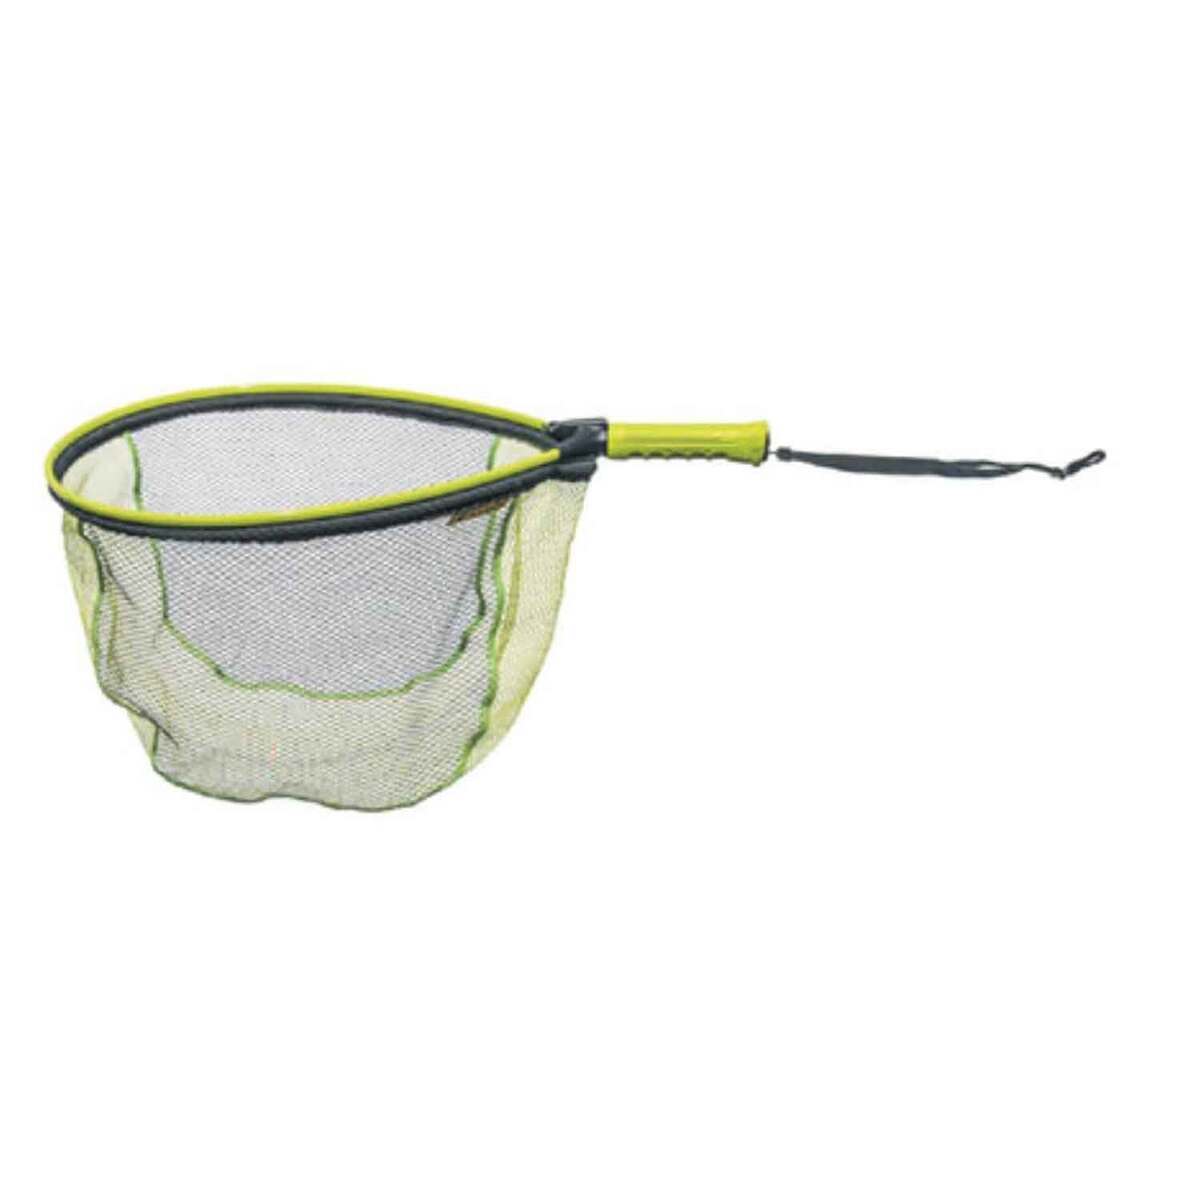 Taitex iFloat Trout/Wading Hand Net - Olive/Black 20inX16in by Sportsman's Warehouse